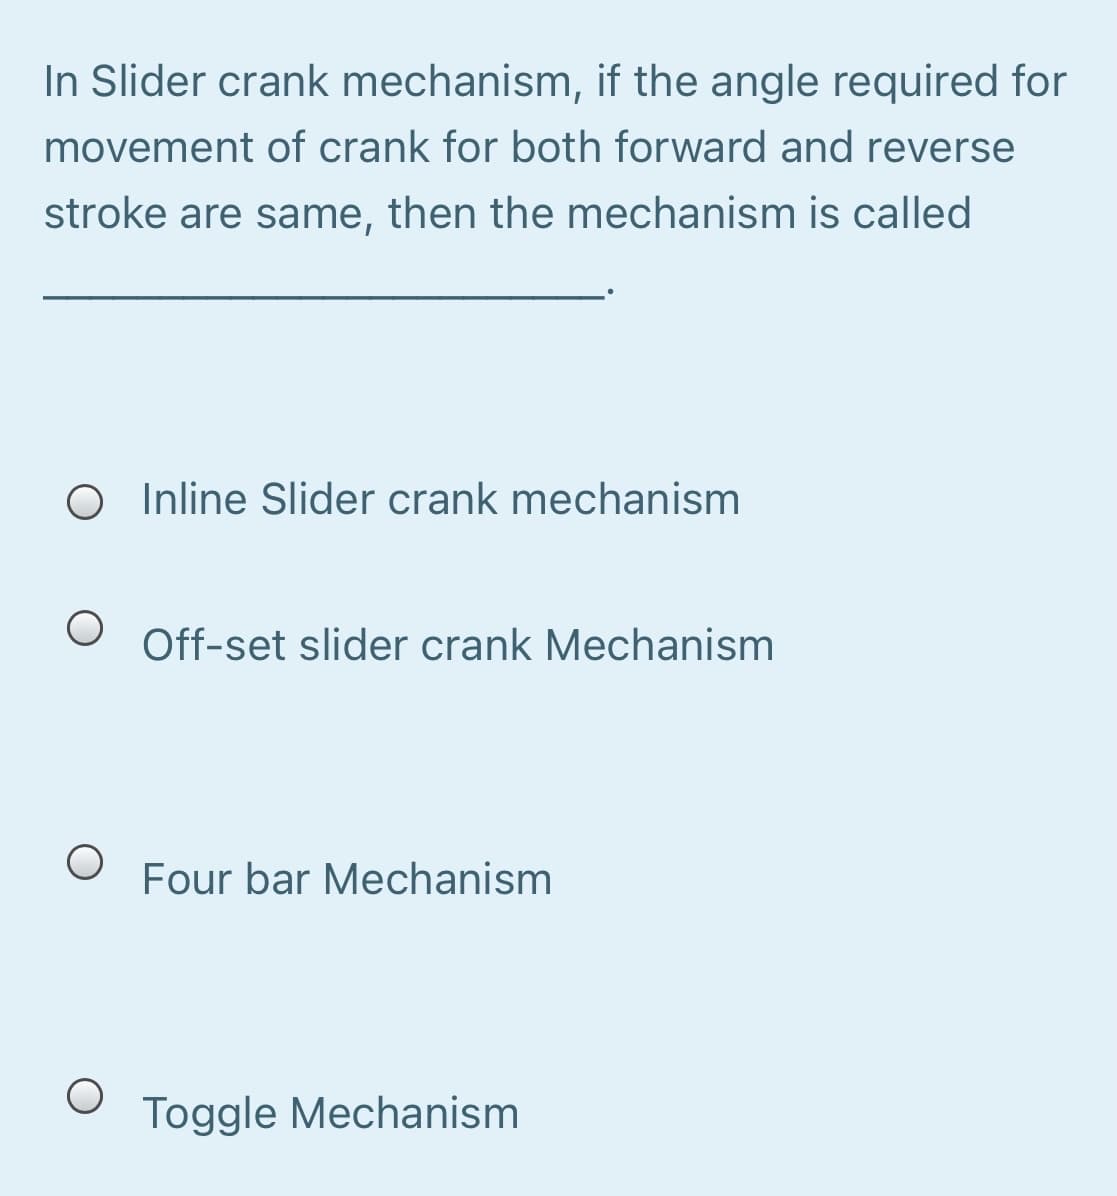 In Slider crank mechanism, if the angle required for
movement of crank for both forward and reverse
stroke are same, then the mechanism is called
O Inline Slider crank mechanism
Off-set slider crank Mechanism
Four bar Mechanism
Toggle Mechanism
